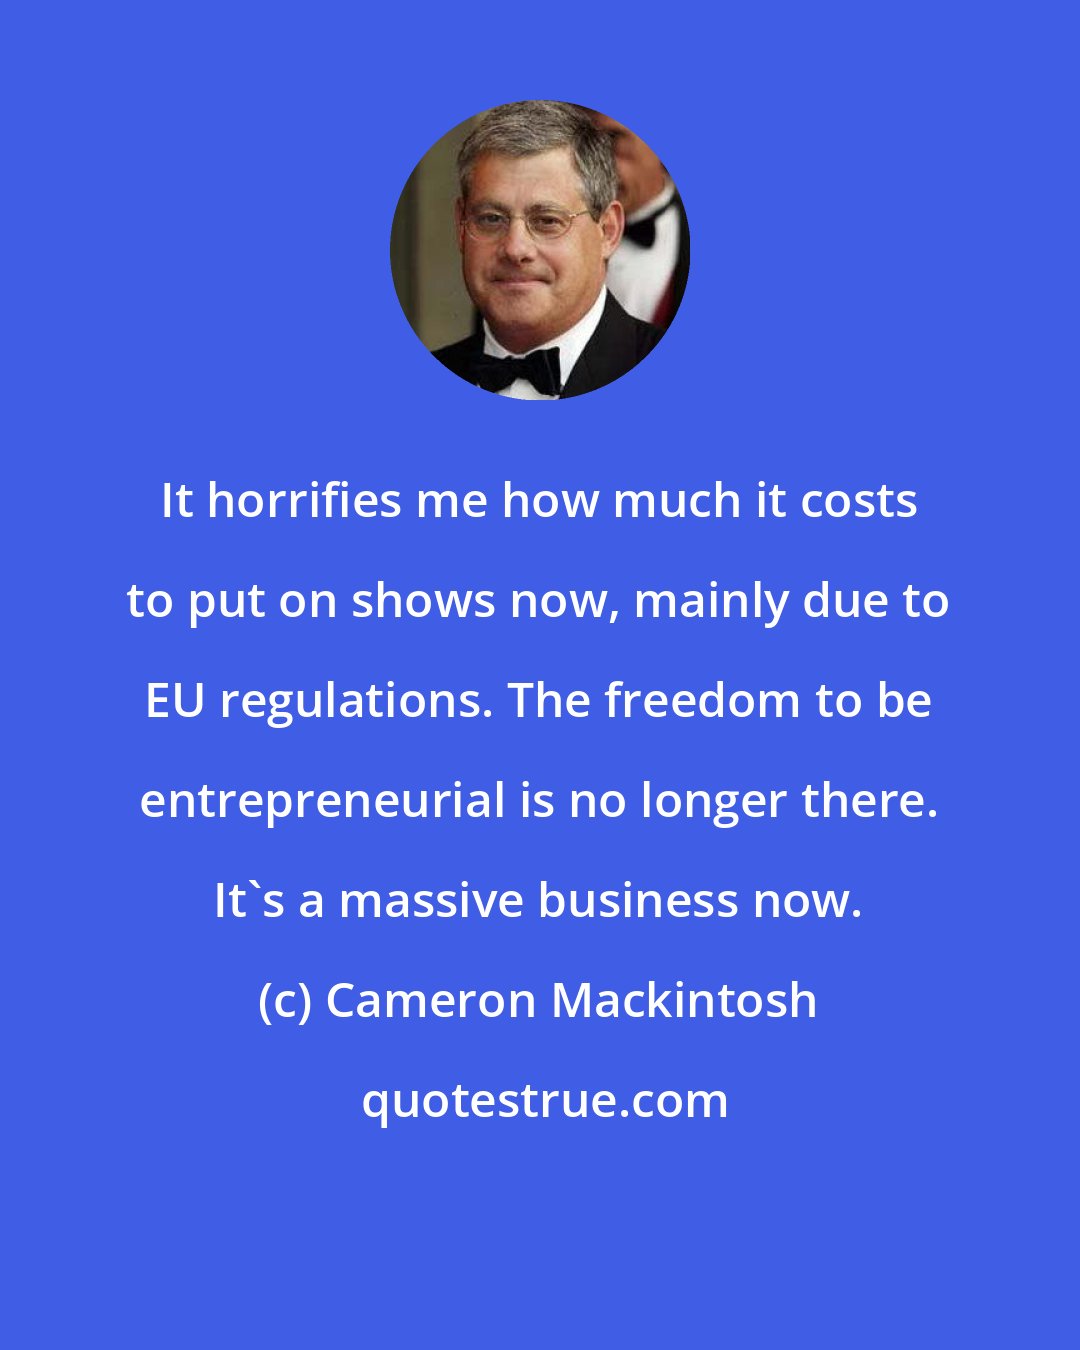 Cameron Mackintosh: It horrifies me how much it costs to put on shows now, mainly due to EU regulations. The freedom to be entrepreneurial is no longer there. It's a massive business now.